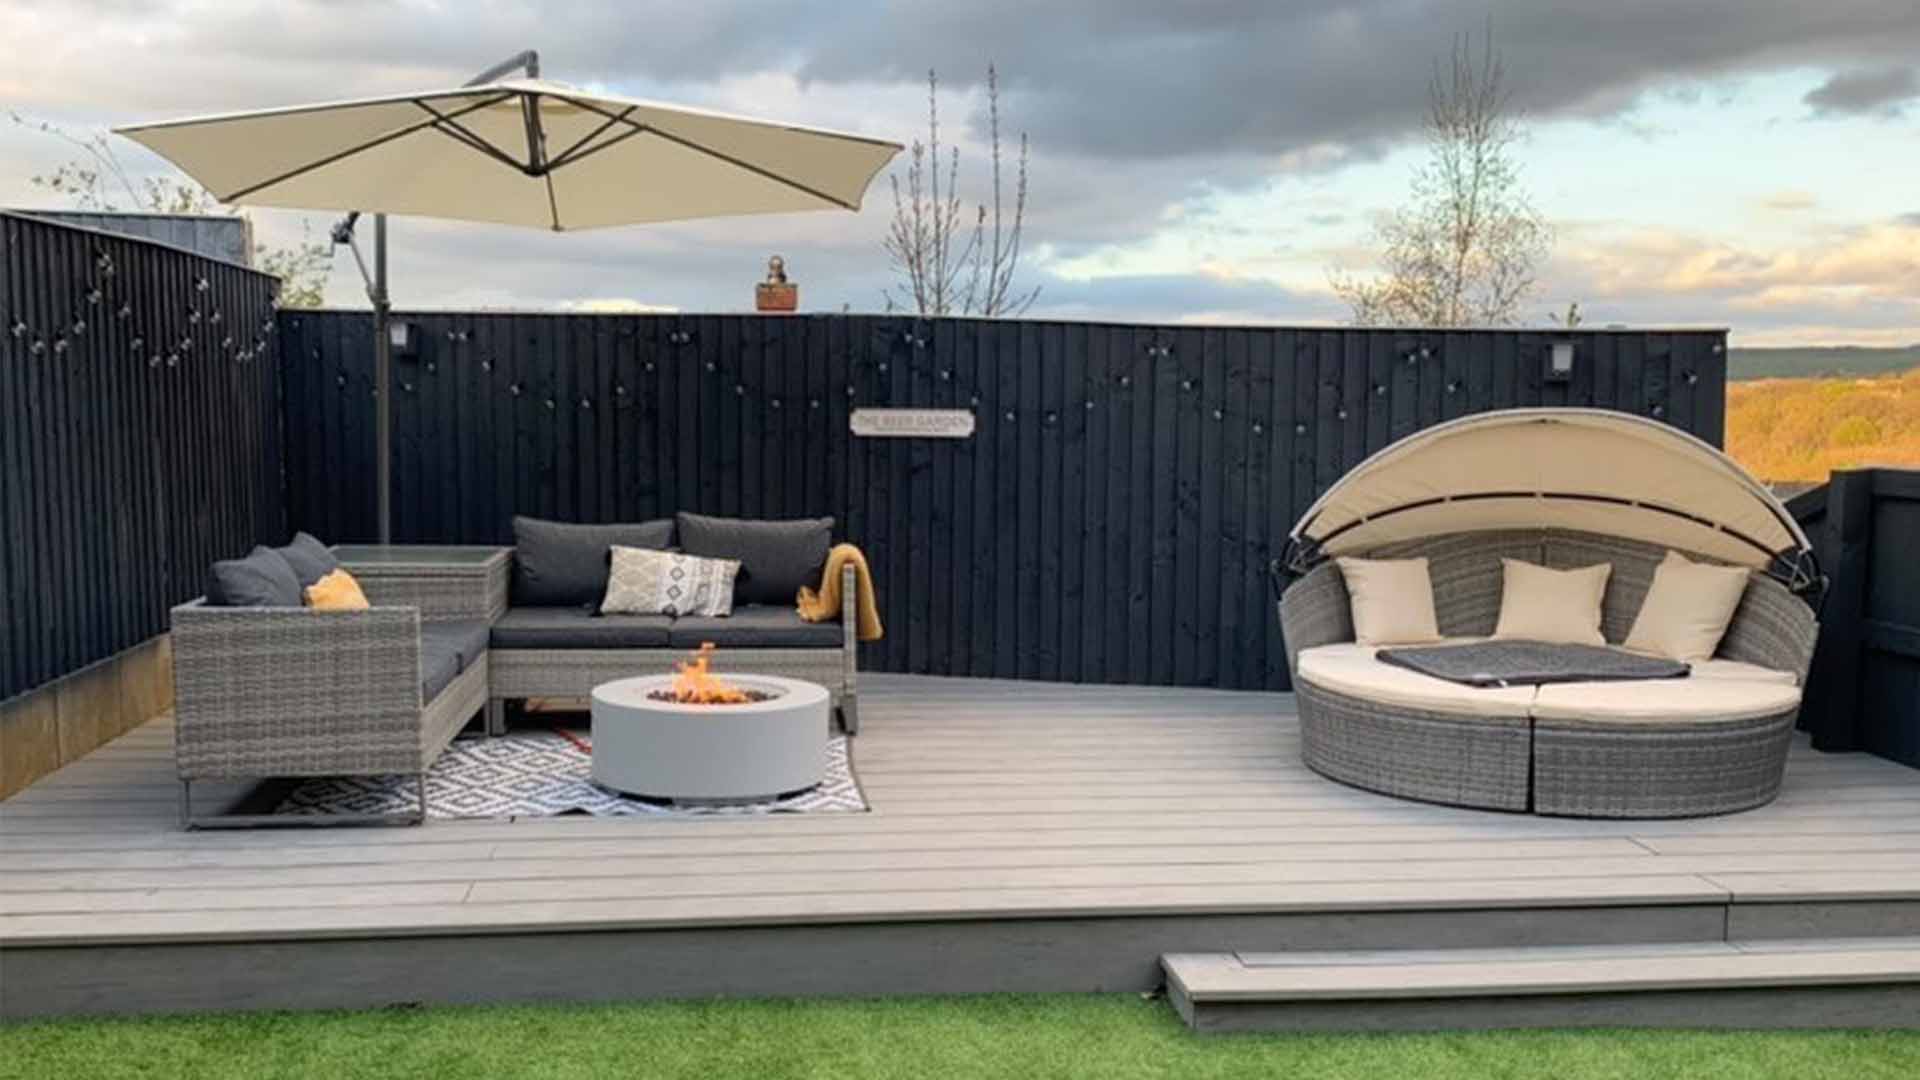 Umbra gas fire pit outdoor decking image